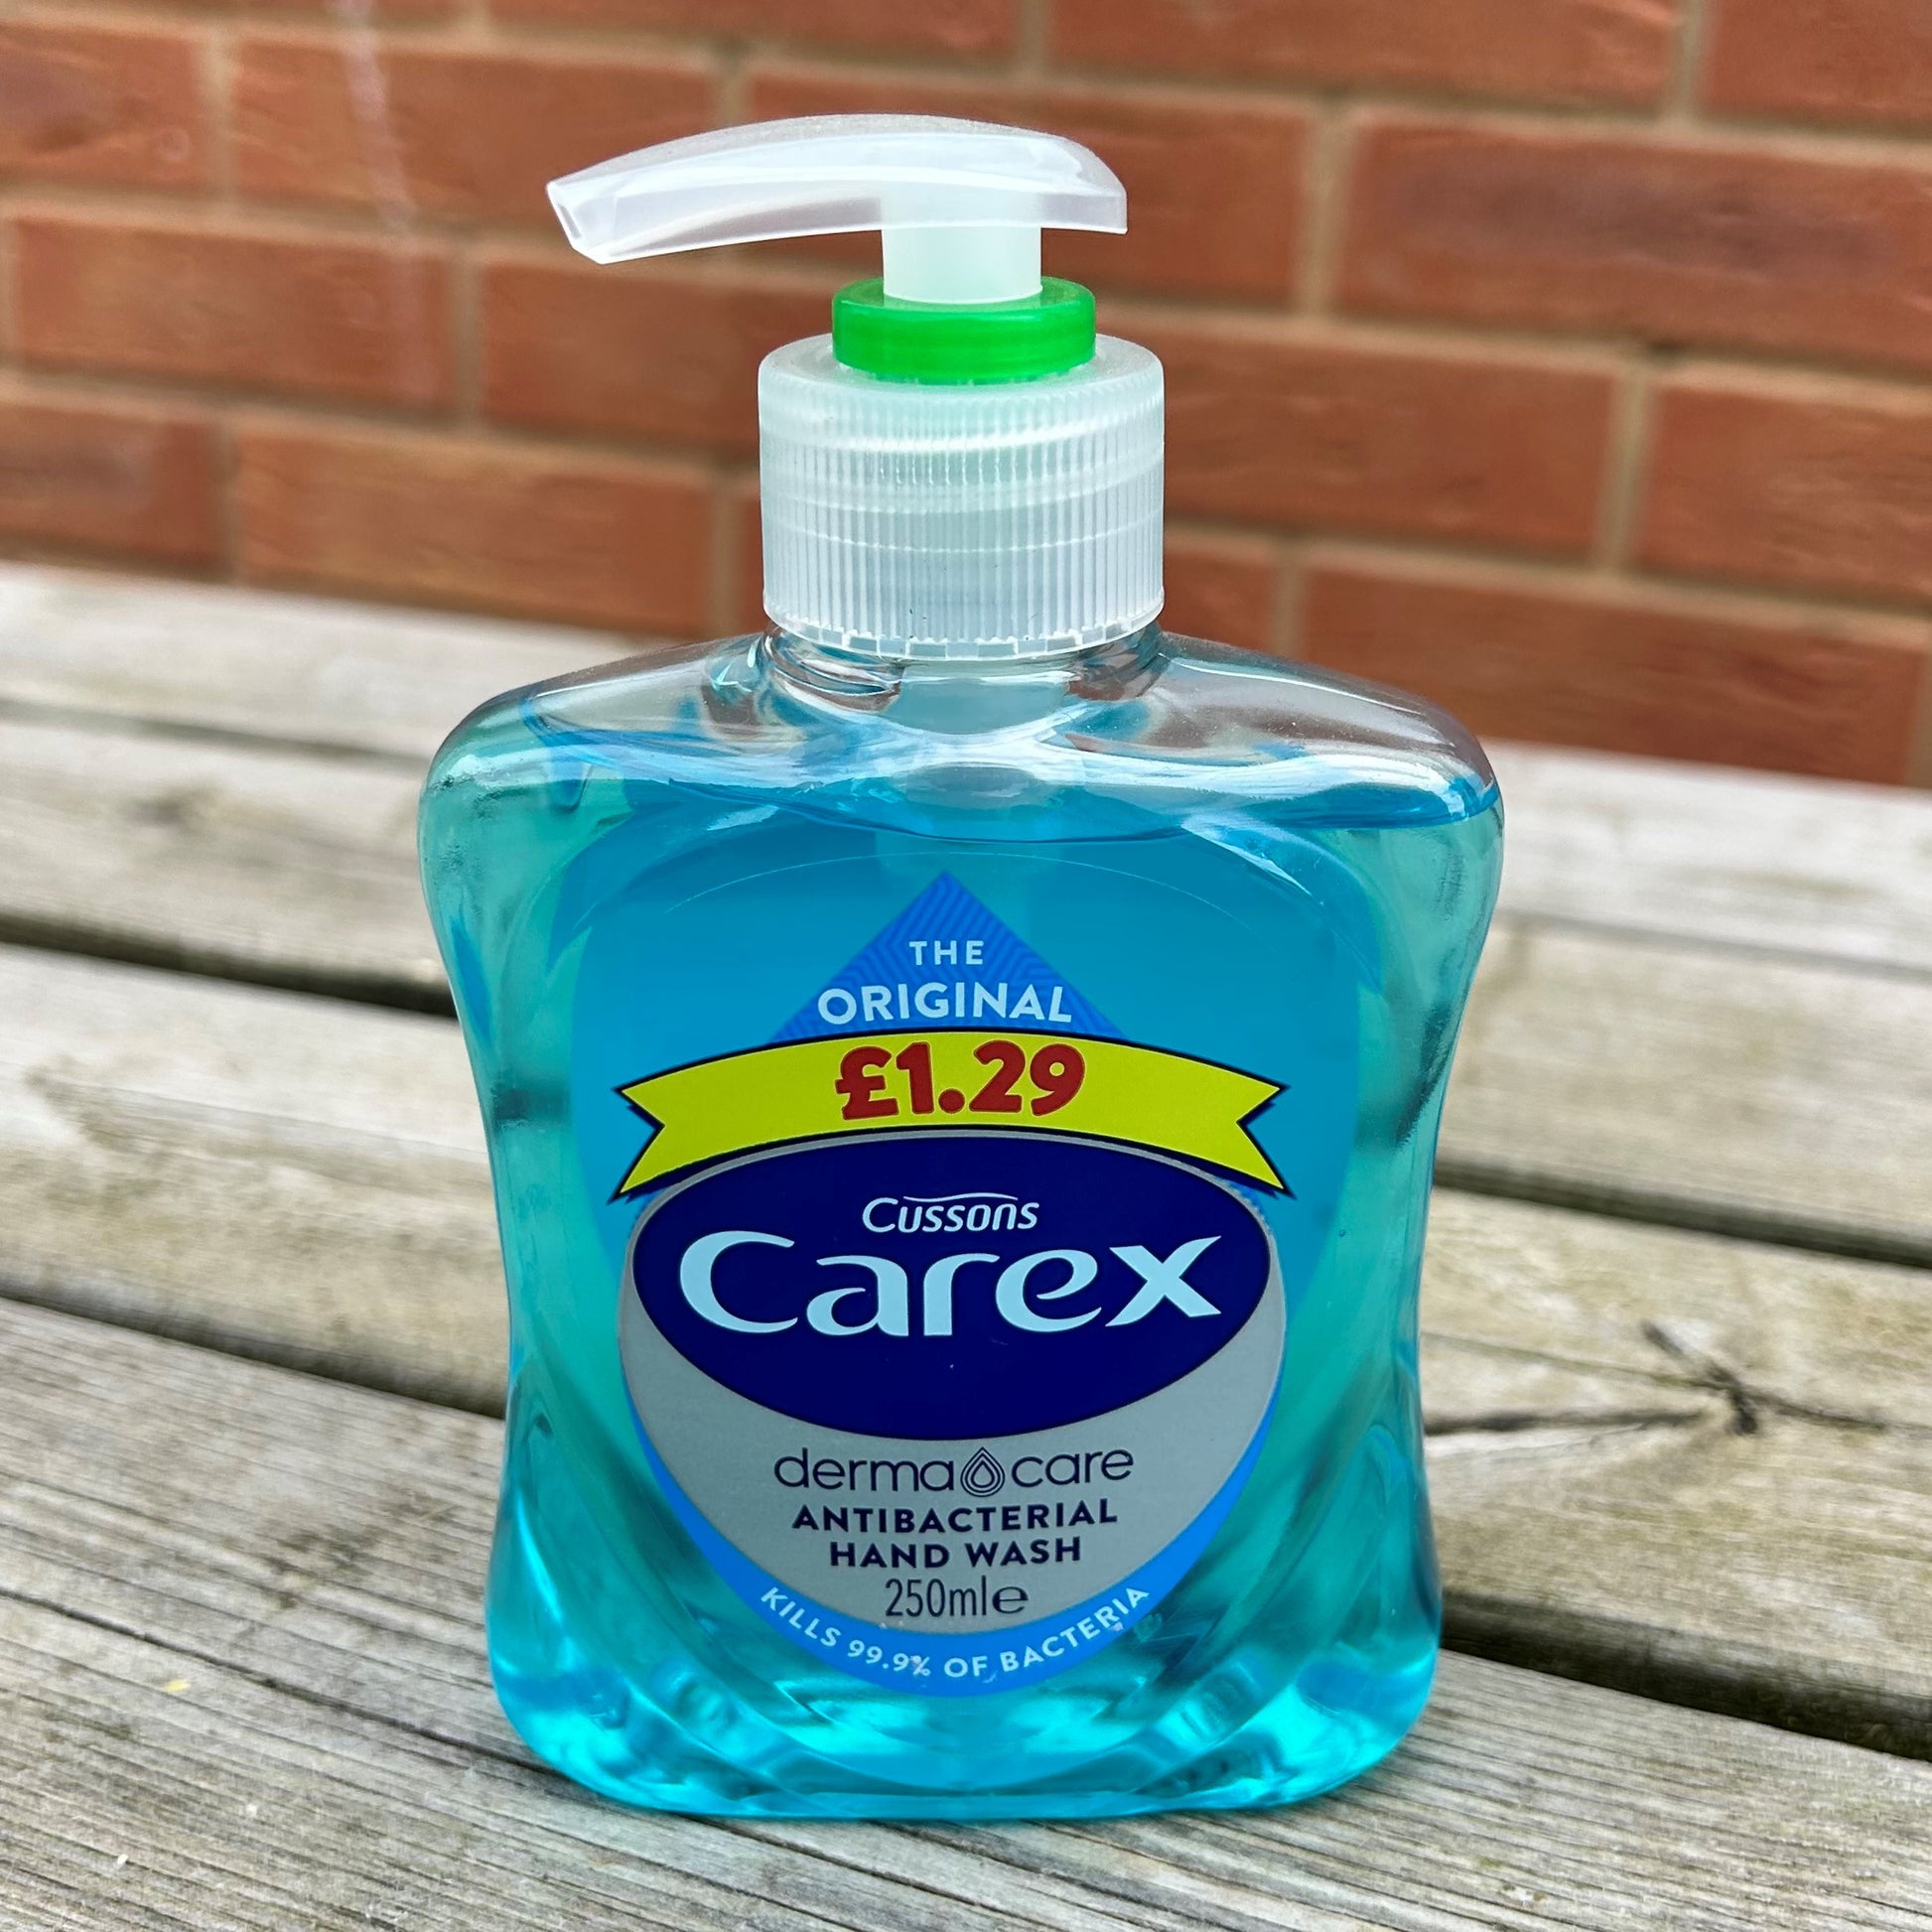 Carex liquid soap in a 250ml pump action container